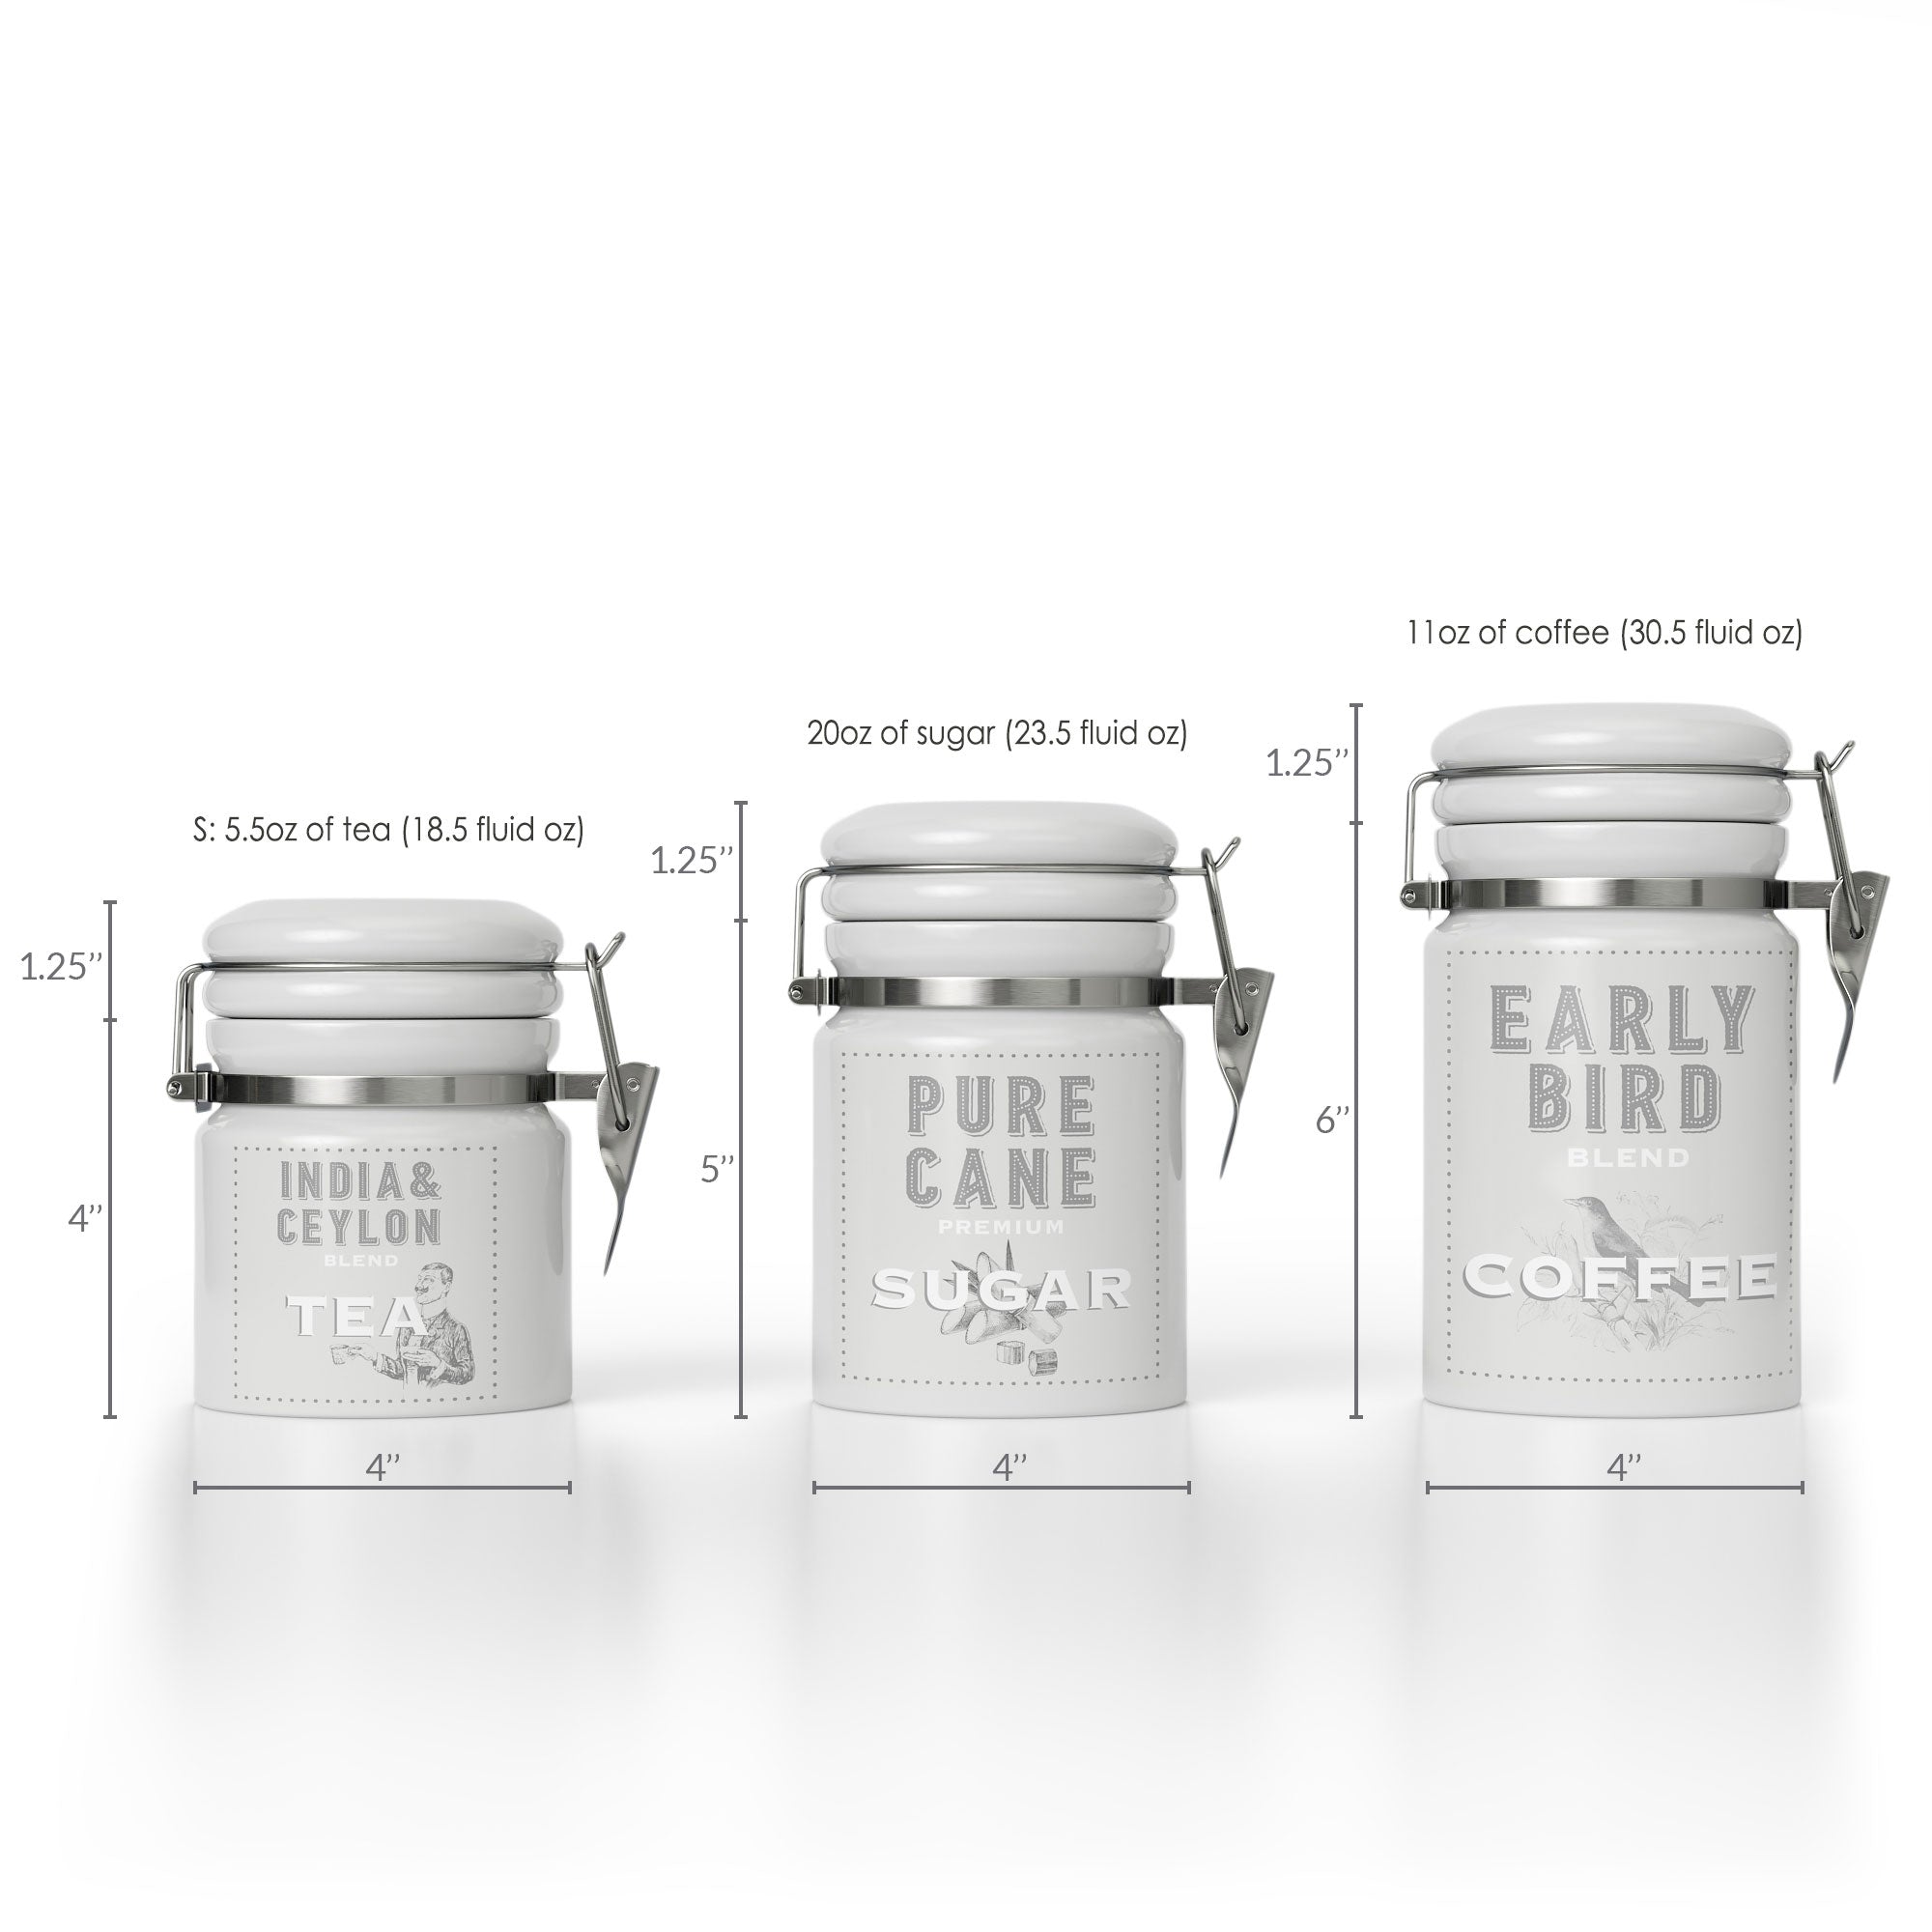  Barnyard Designs Farmhouse Canisters for the Kitchen Counter,  Country Decor - Rustic Flour Sugar Coffee Tea Storage, Set of 4, Largest is  5.5 x 11.25 : Home & Kitchen